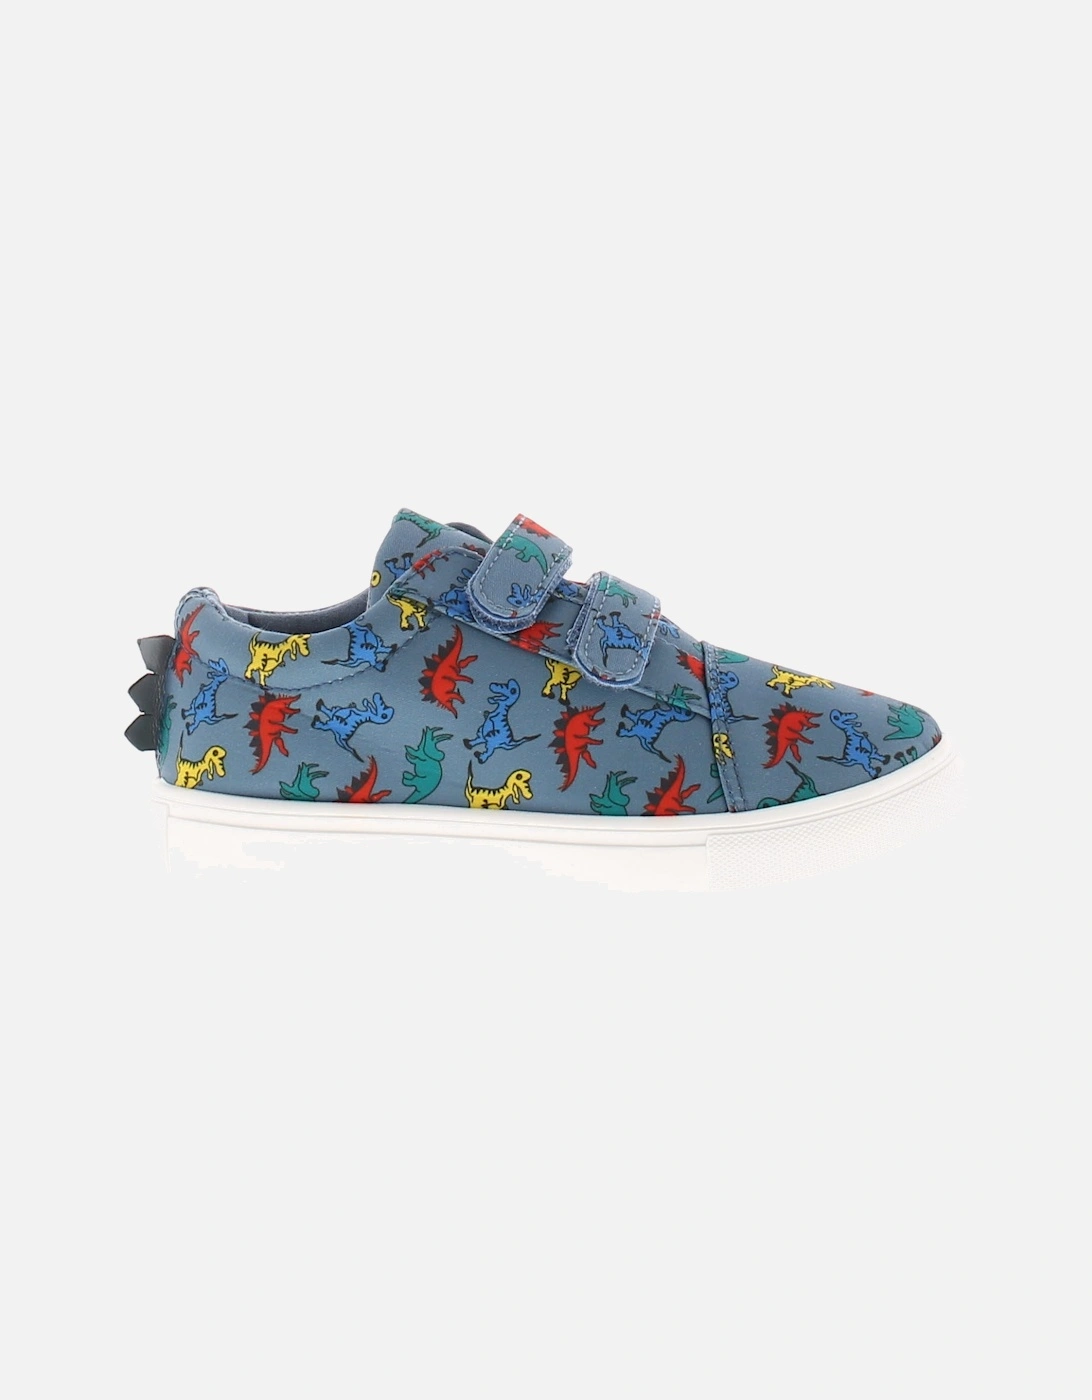 Younger Childrens Shoes Canvas Deano blue UK Size